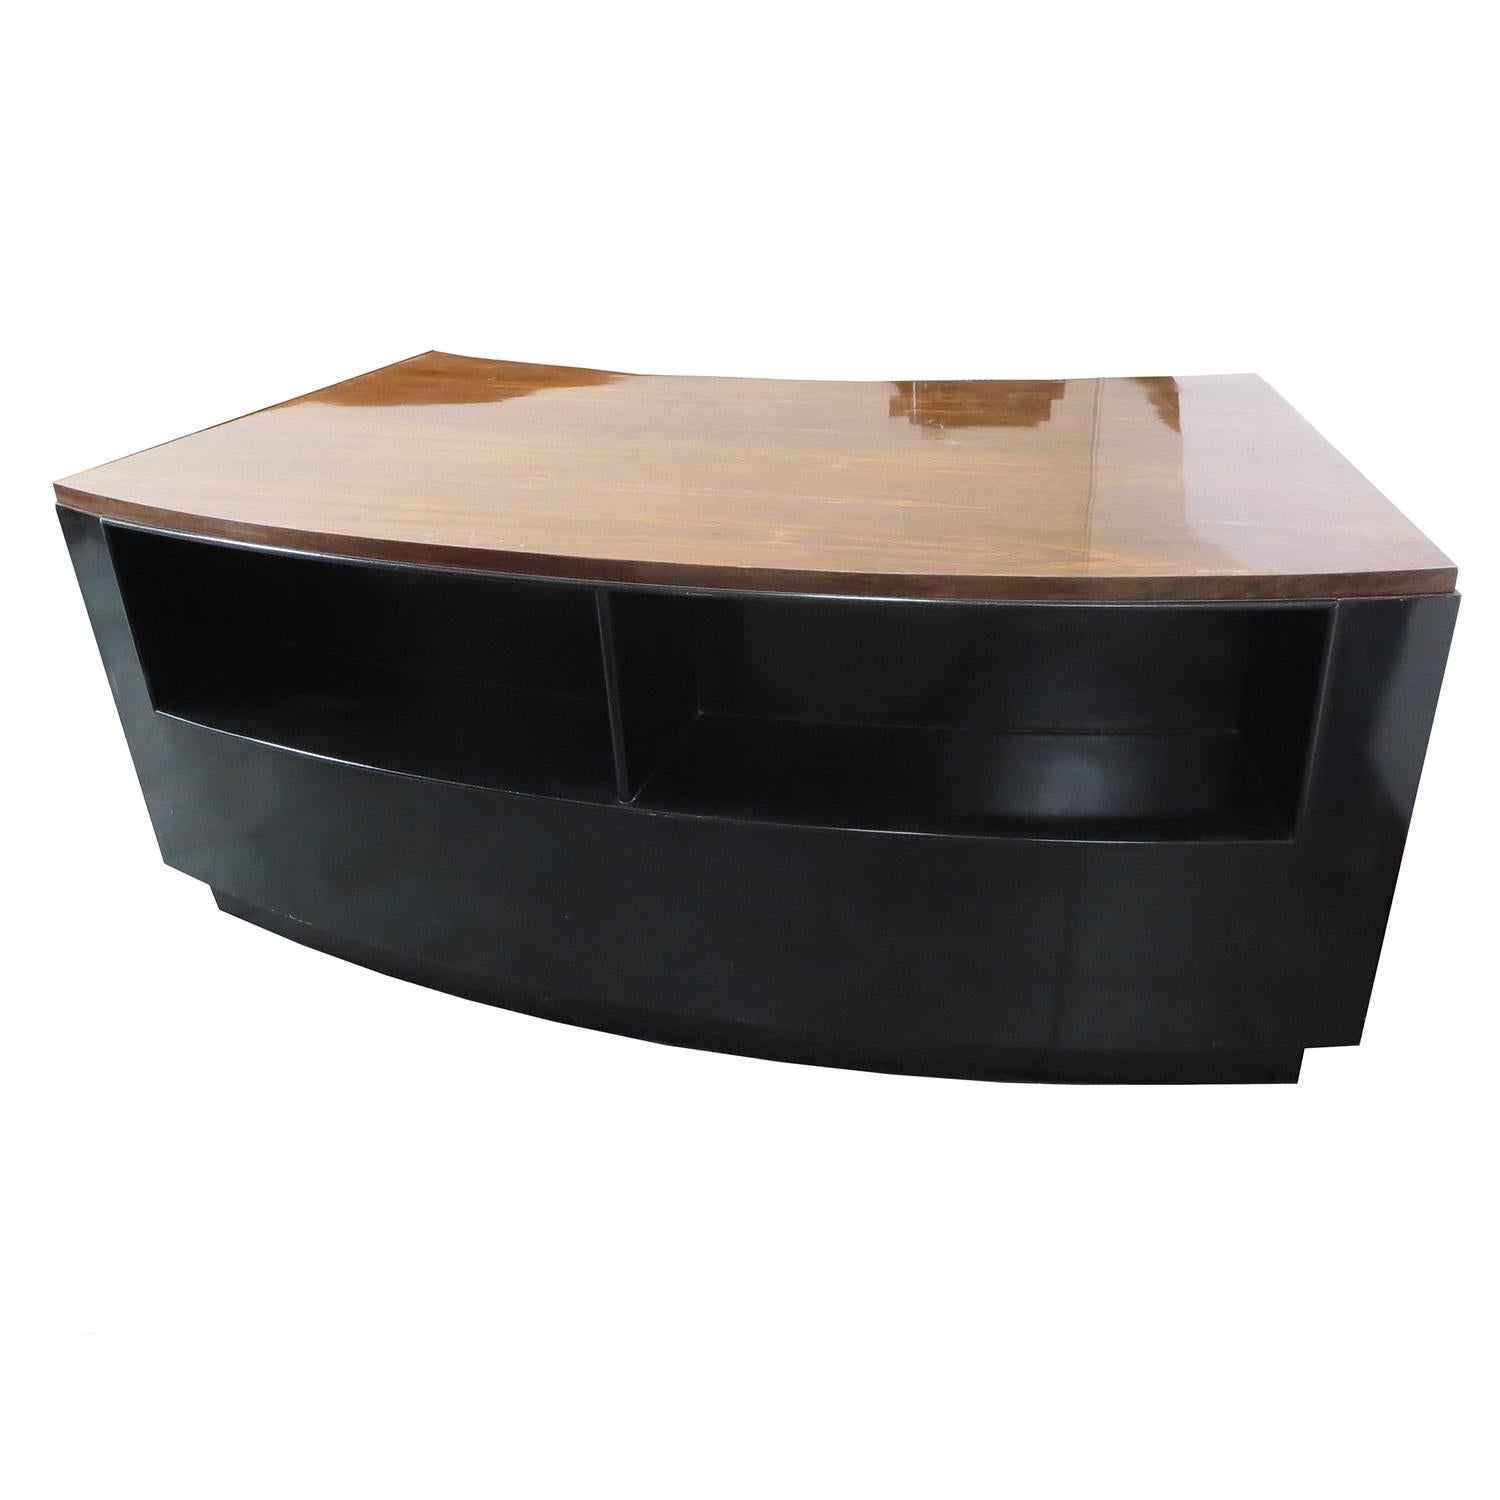 French Art Deco Desk in Walnut and Black Lacquer